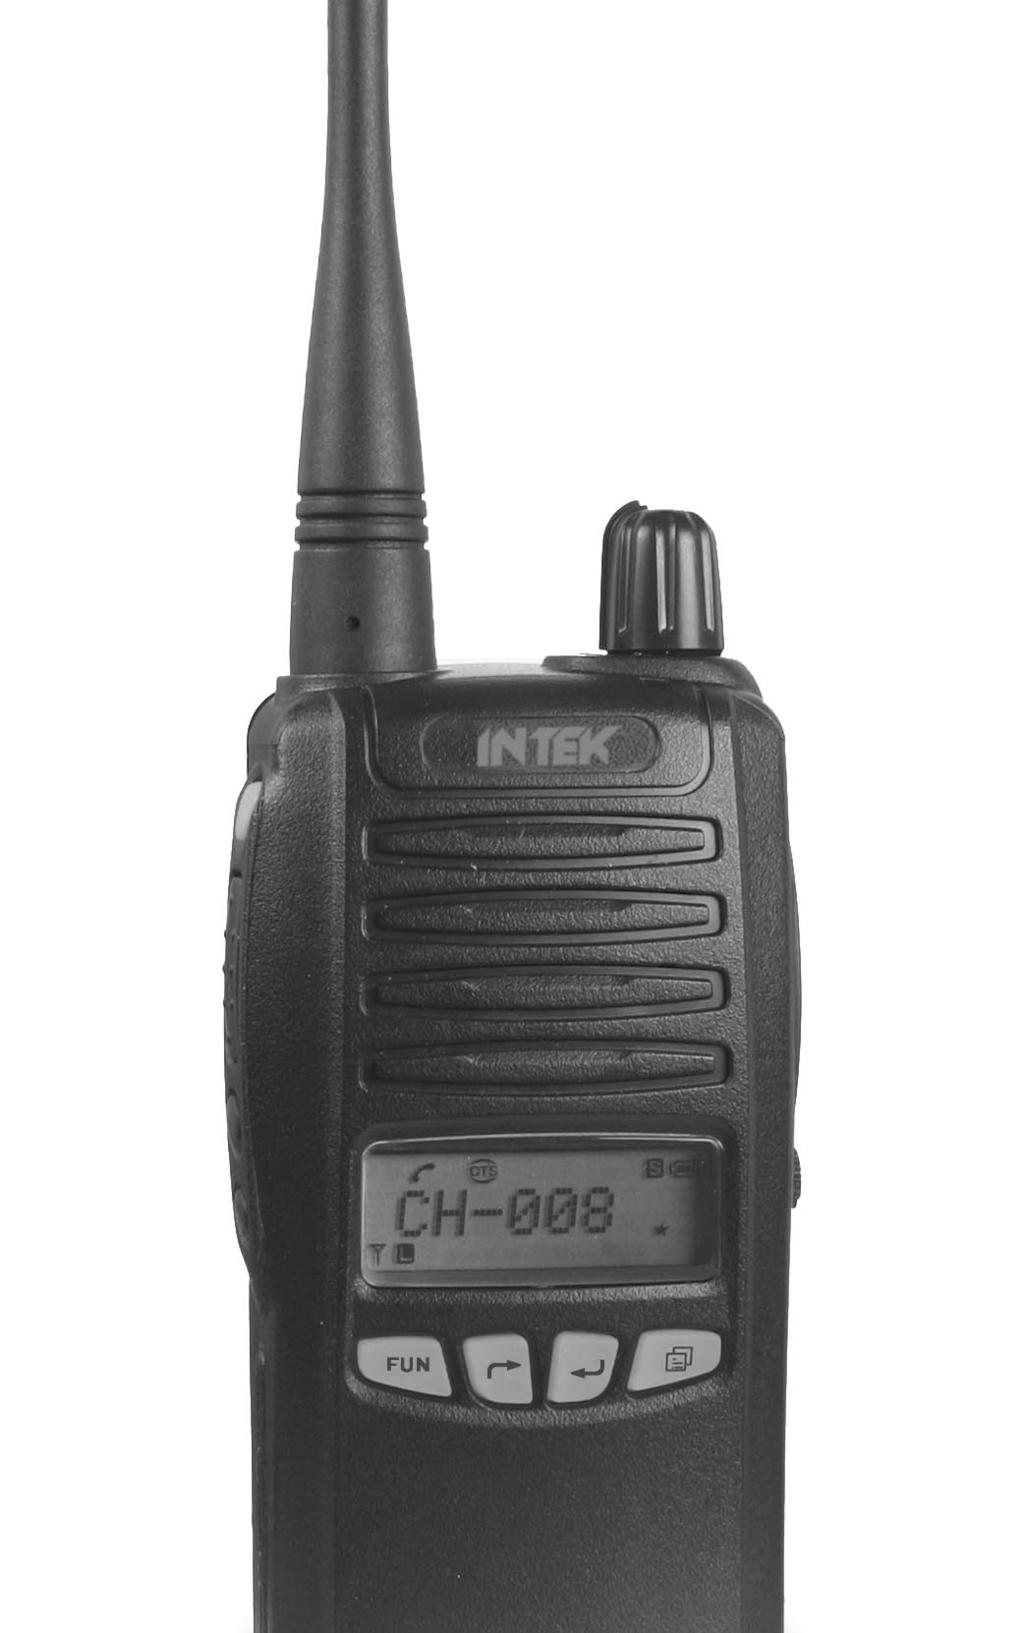 HT-174S 136-175 MHz VHF FM / 199CH / 5W PROFESSIONAL 2-WAY RADIO PC PROGRAMMABLE HT-460S 400-470 MHz